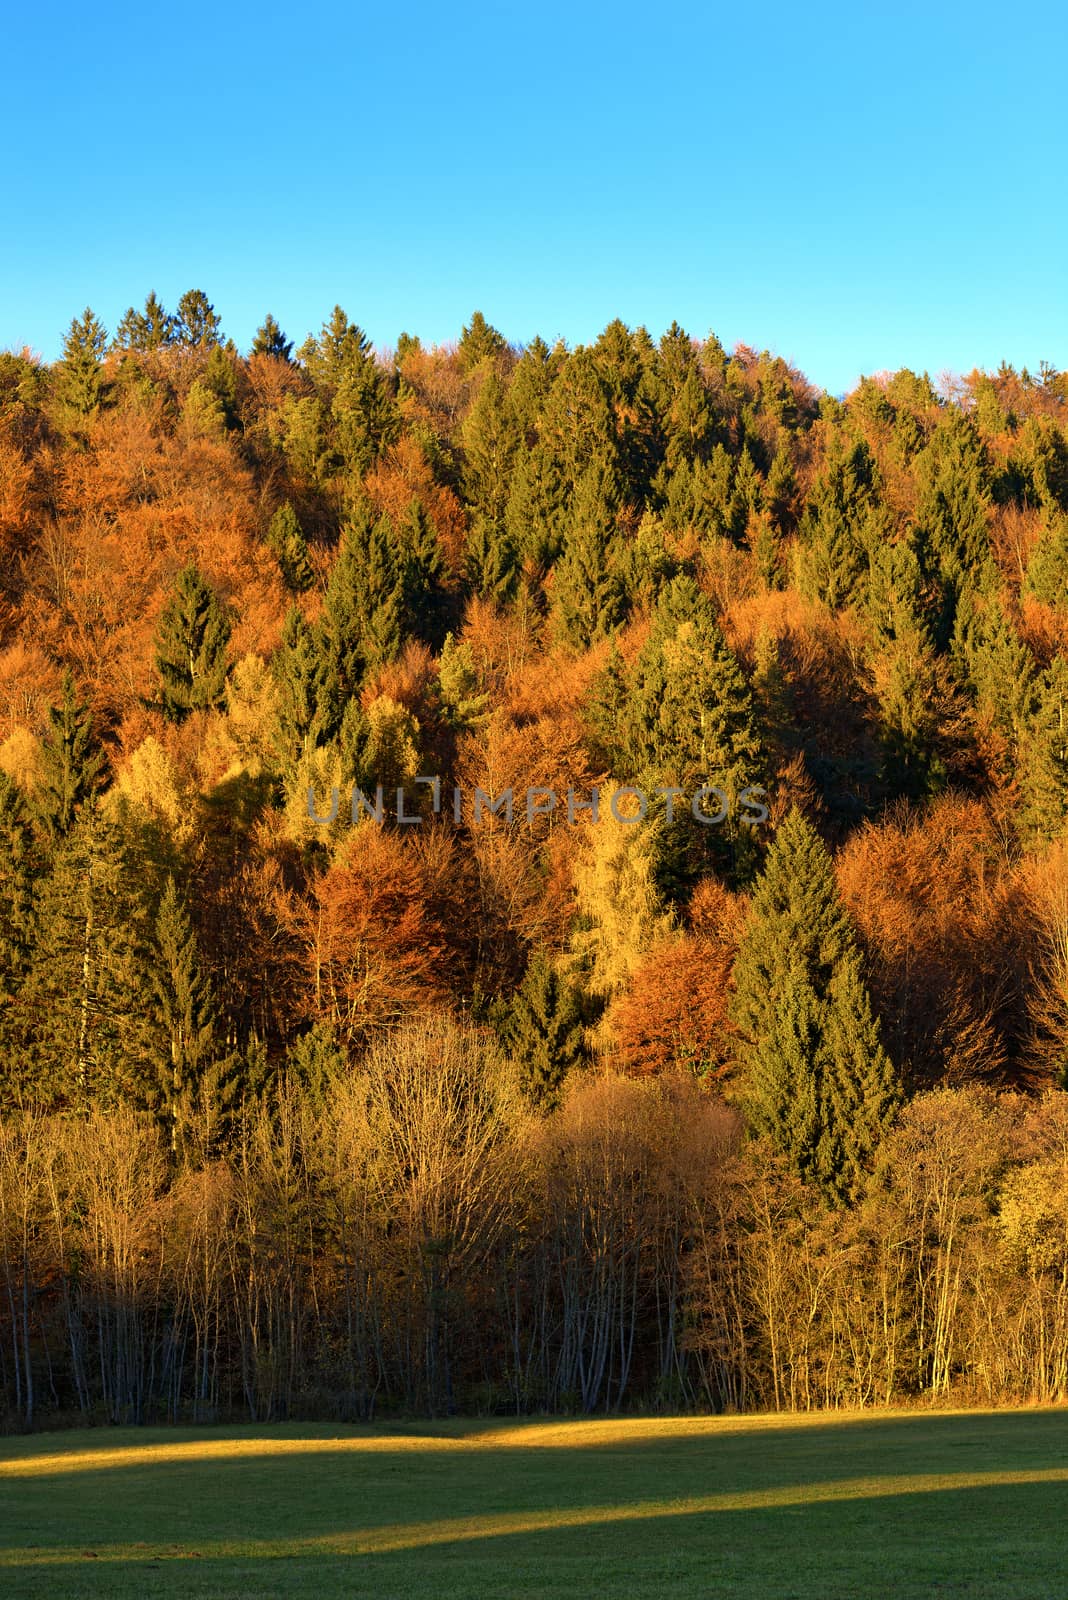 Autumnal forest with pines, beeches and firs at sunset. Val di Sella (Sella Valley), Borgo Valsugana, Trento, Italy